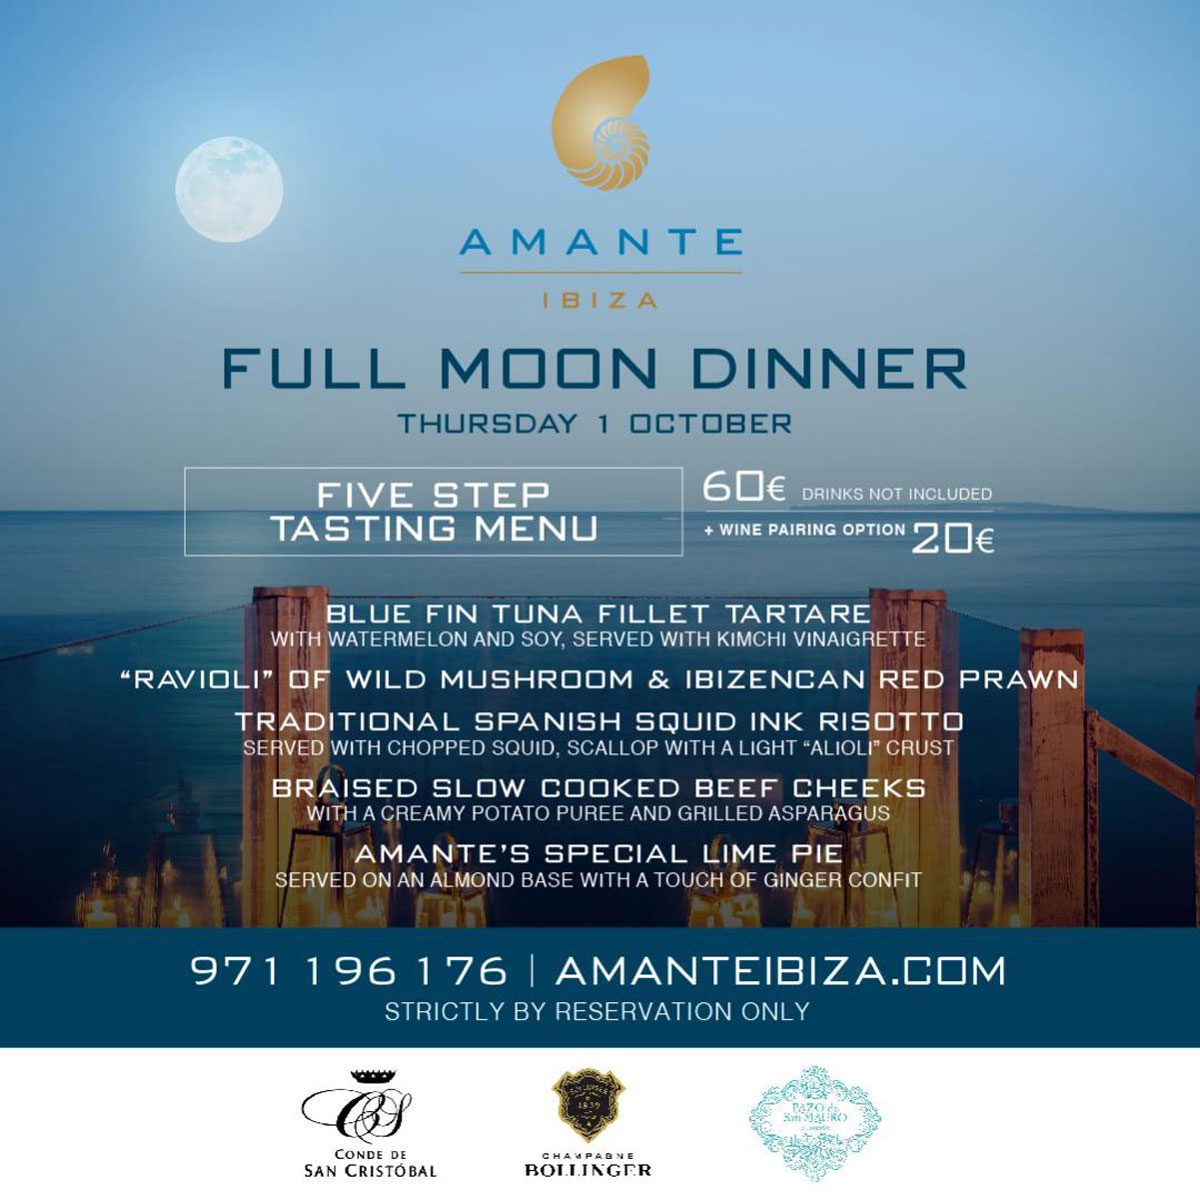 Dinner Under The Full Moon In Amante Ibiza